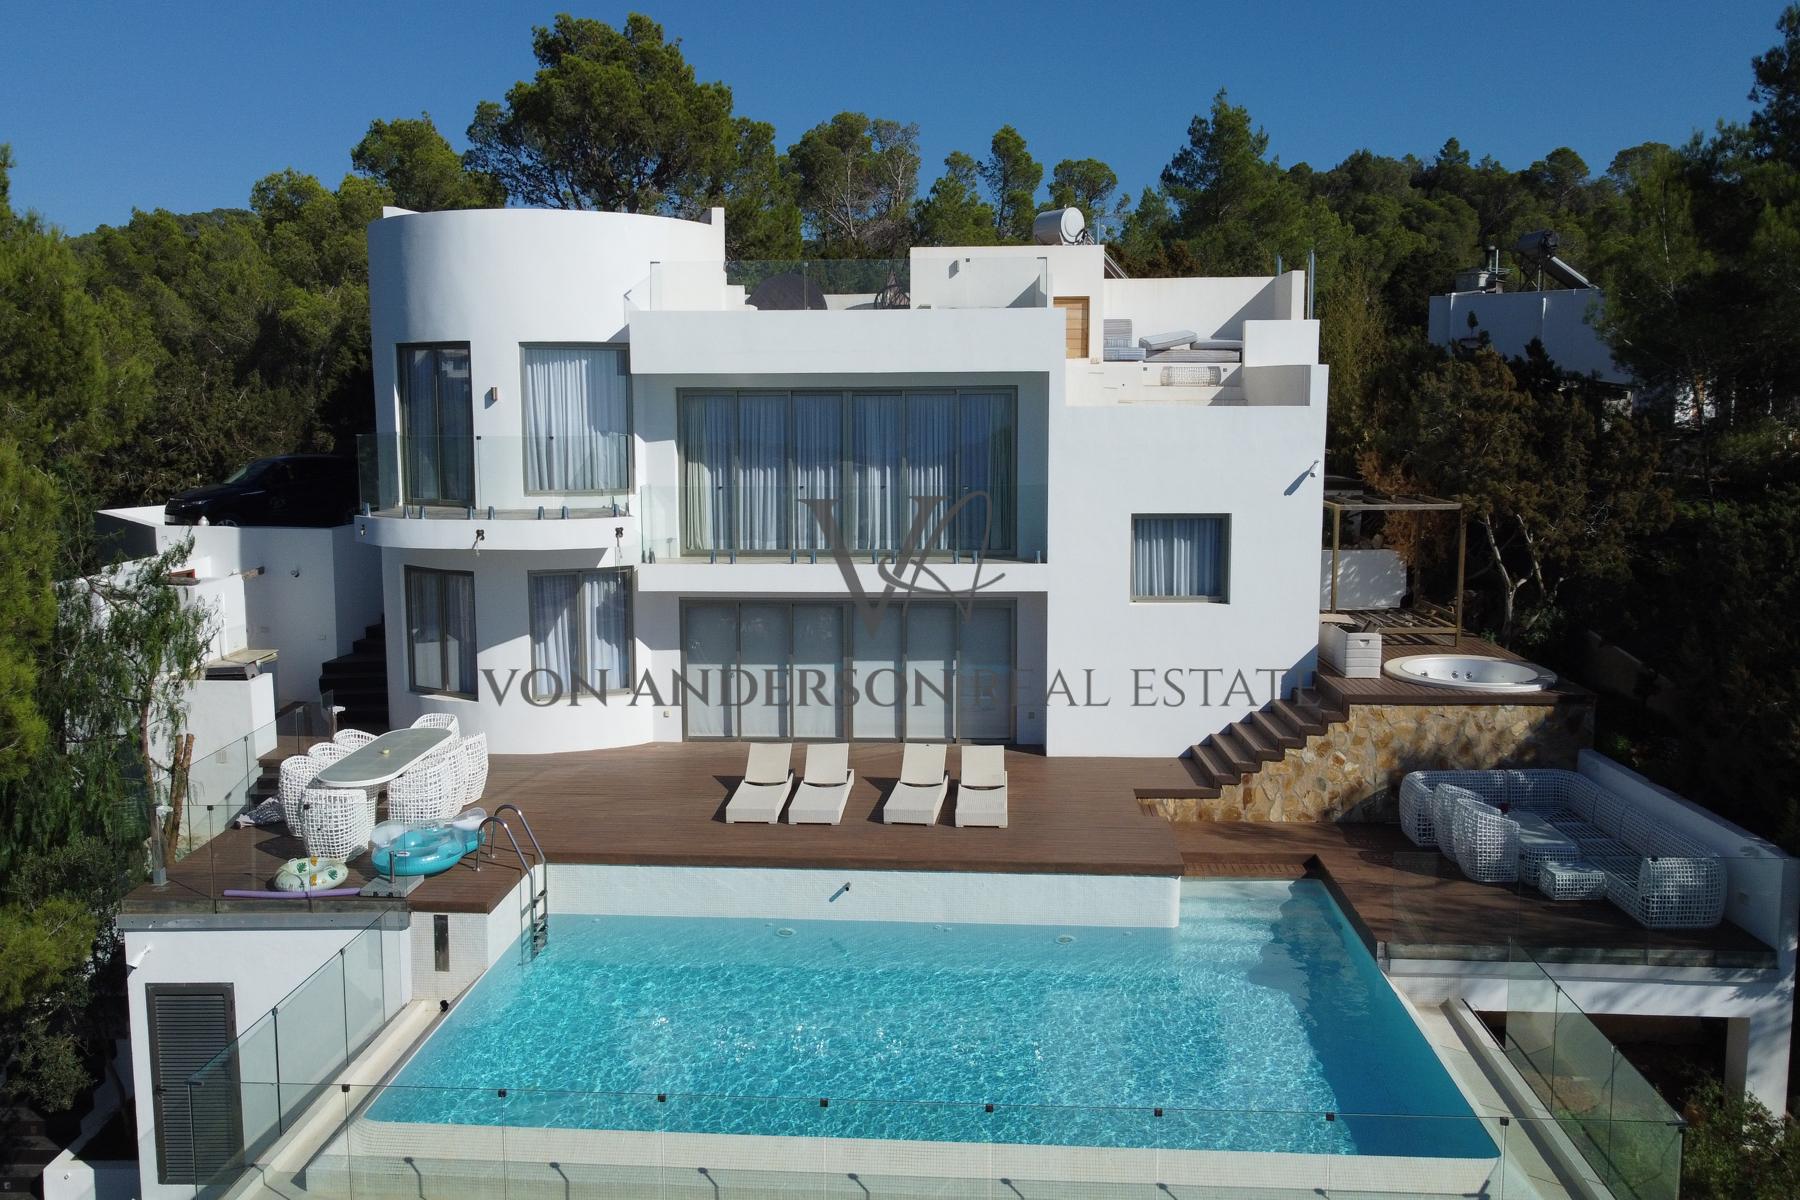 Sophisticated Luxury Villa Offering Breathtaking Views of the Sea and Mesmerising Sunsets, ref. VA1010, for sale in Ibiza by Von Anderson Real Estate